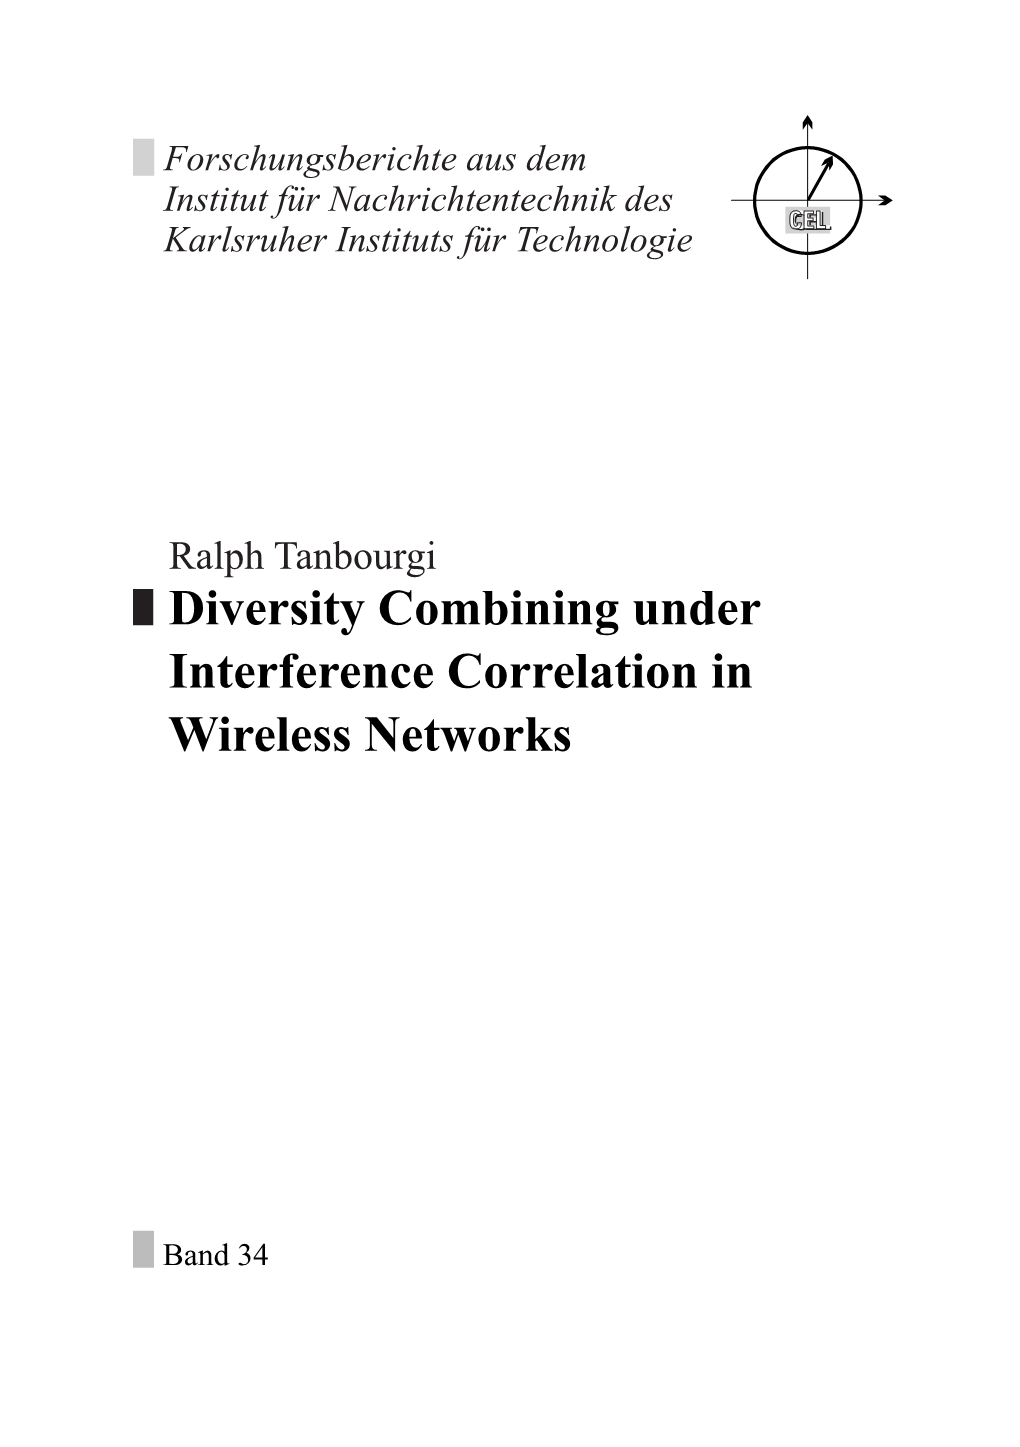 Diversity Combining Under Interference Correlation in Wireless Networks